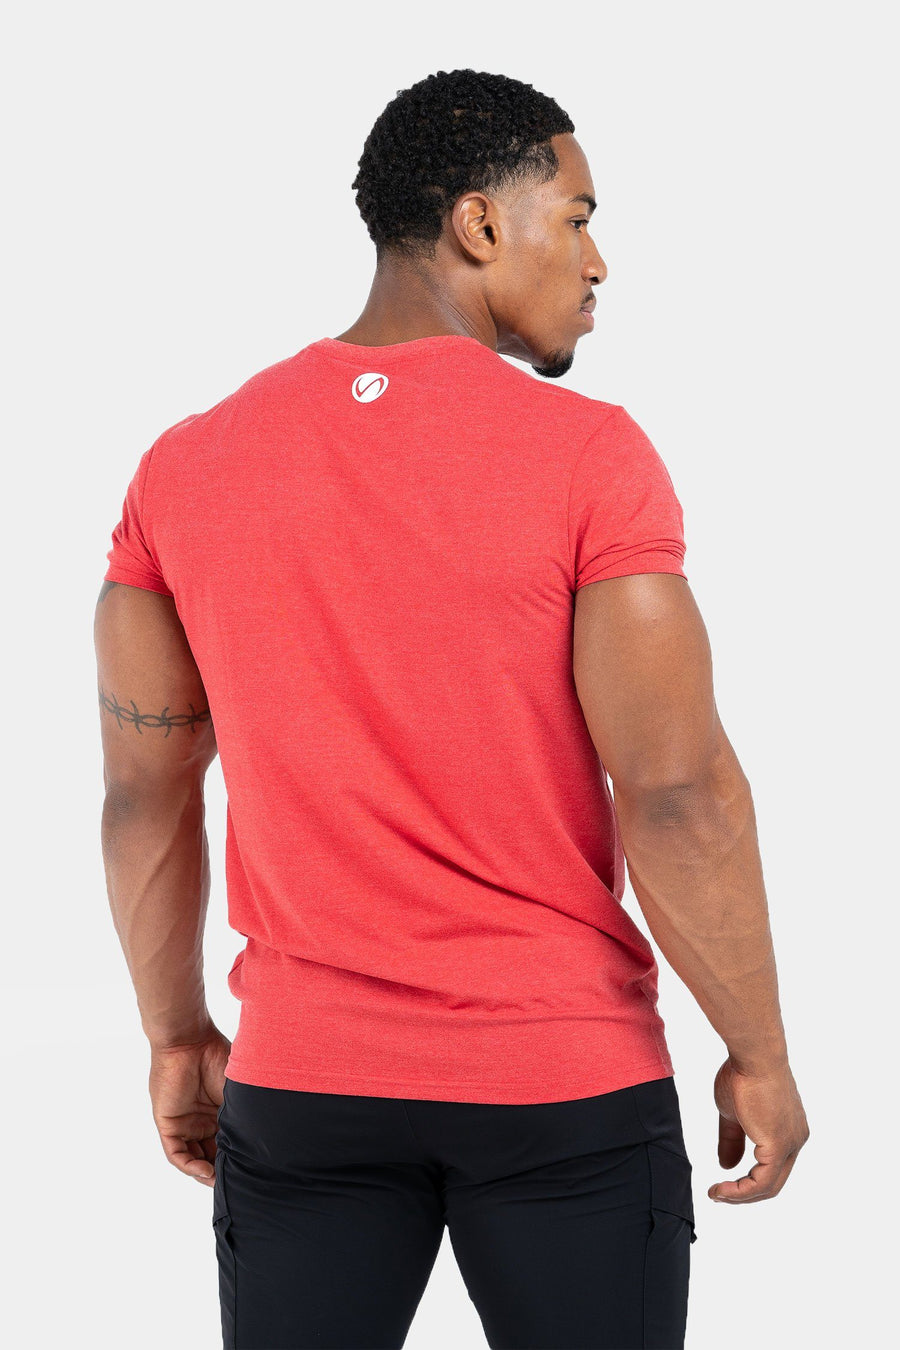 TLF Motion Gym T-Shirt Red Heather 2